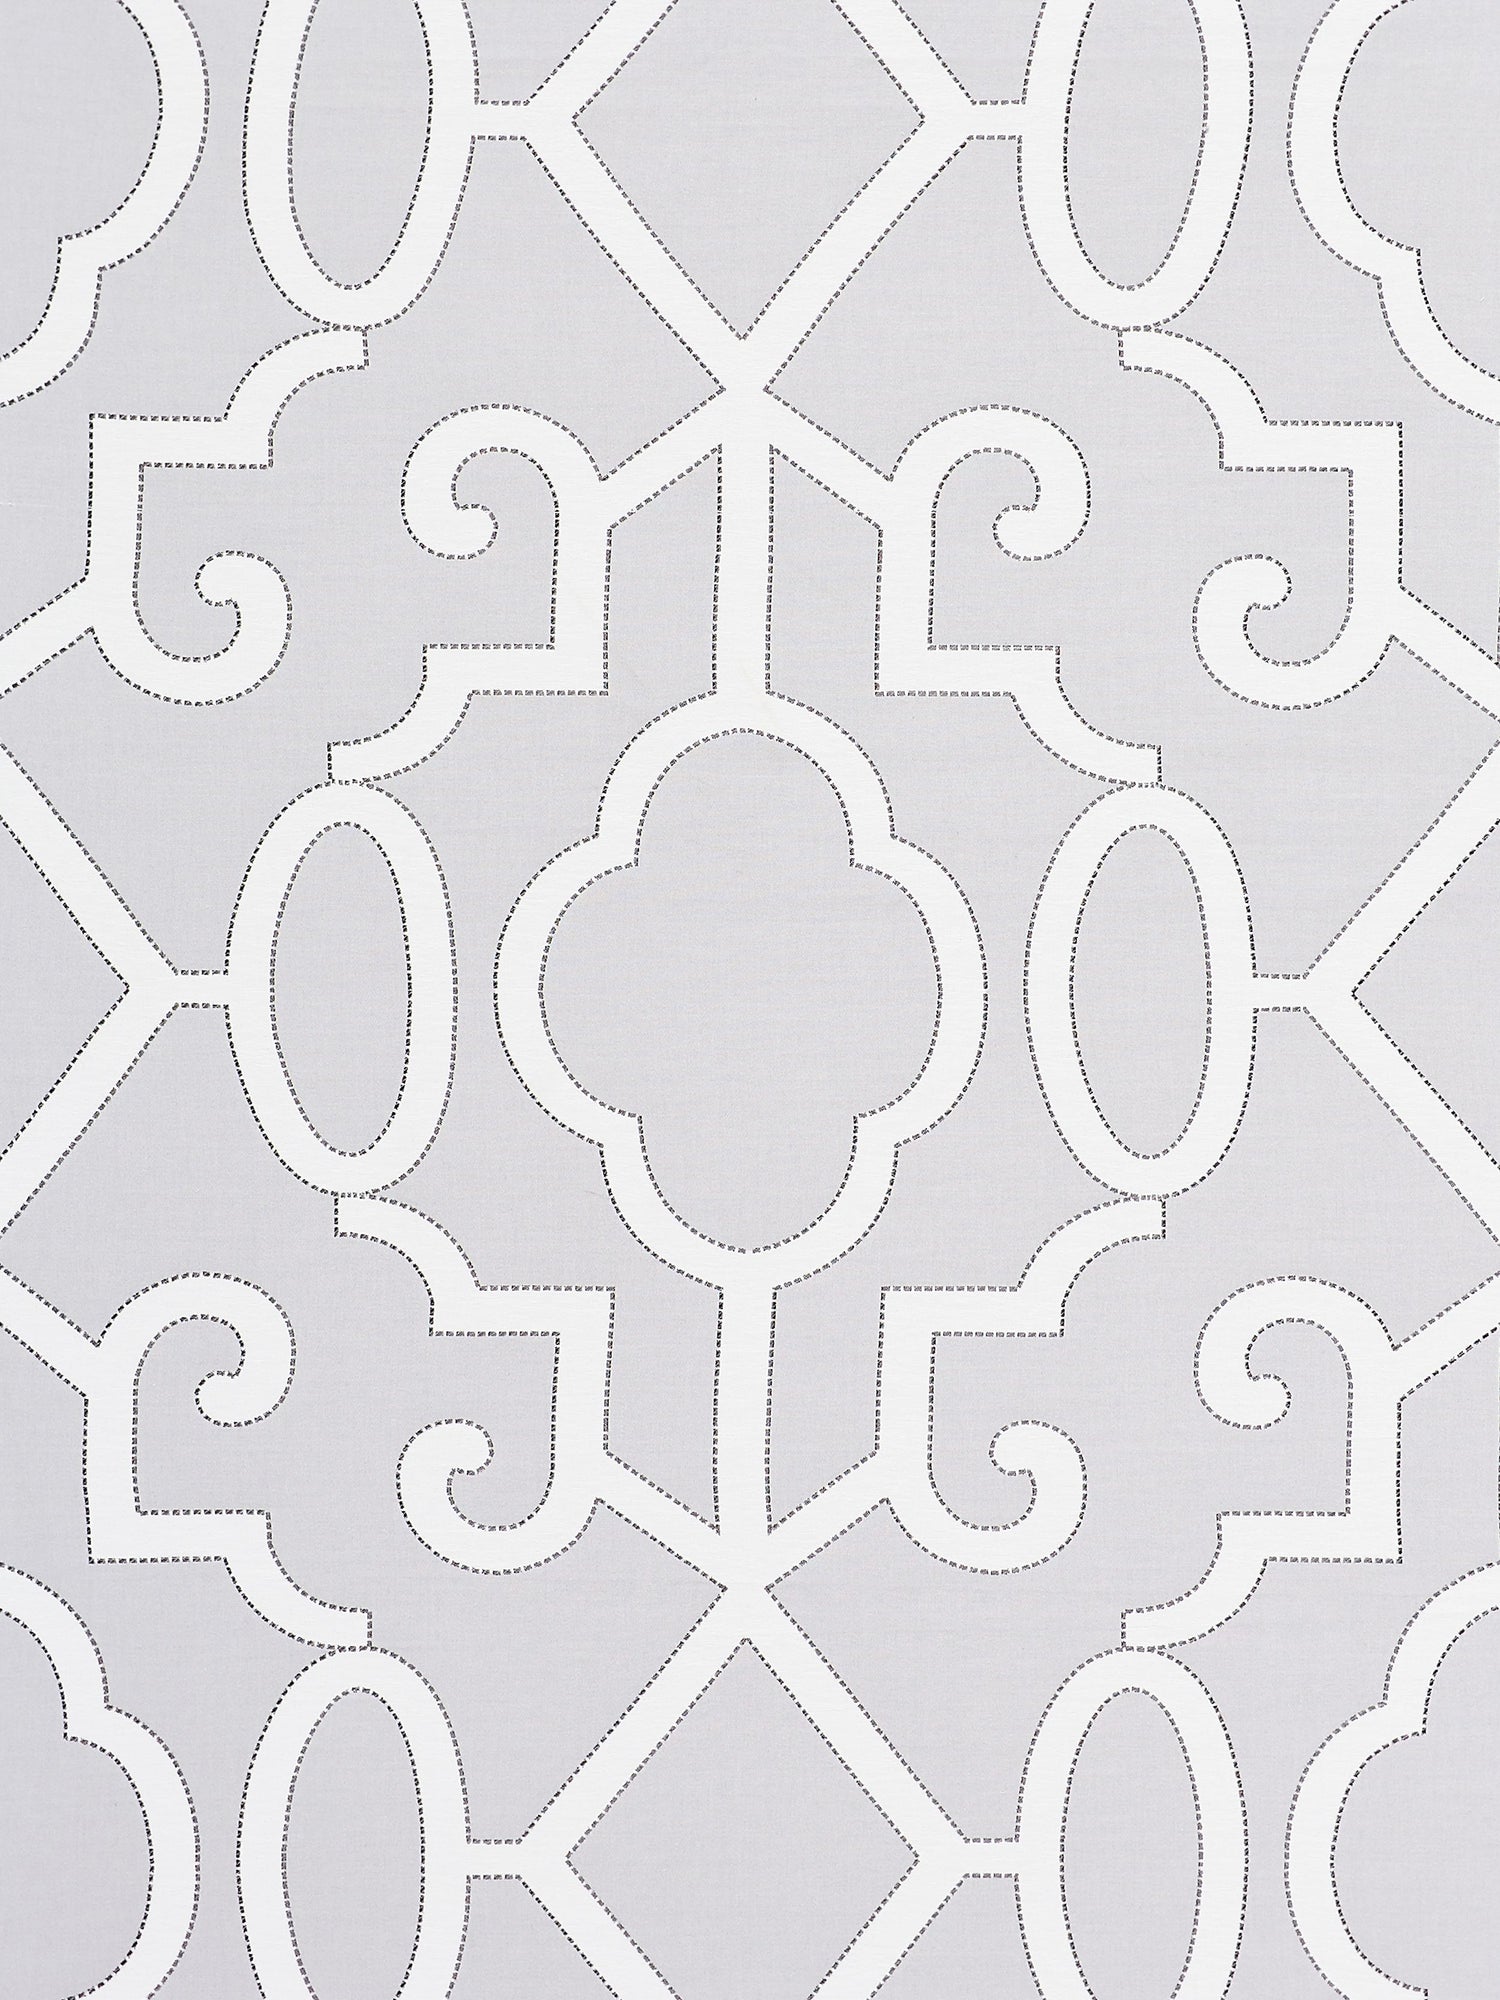 Ming Fretwork fabric in pearl grey color - pattern number SC 000327012 - by Scalamandre in the Scalamandre Fabrics Book 1 collection